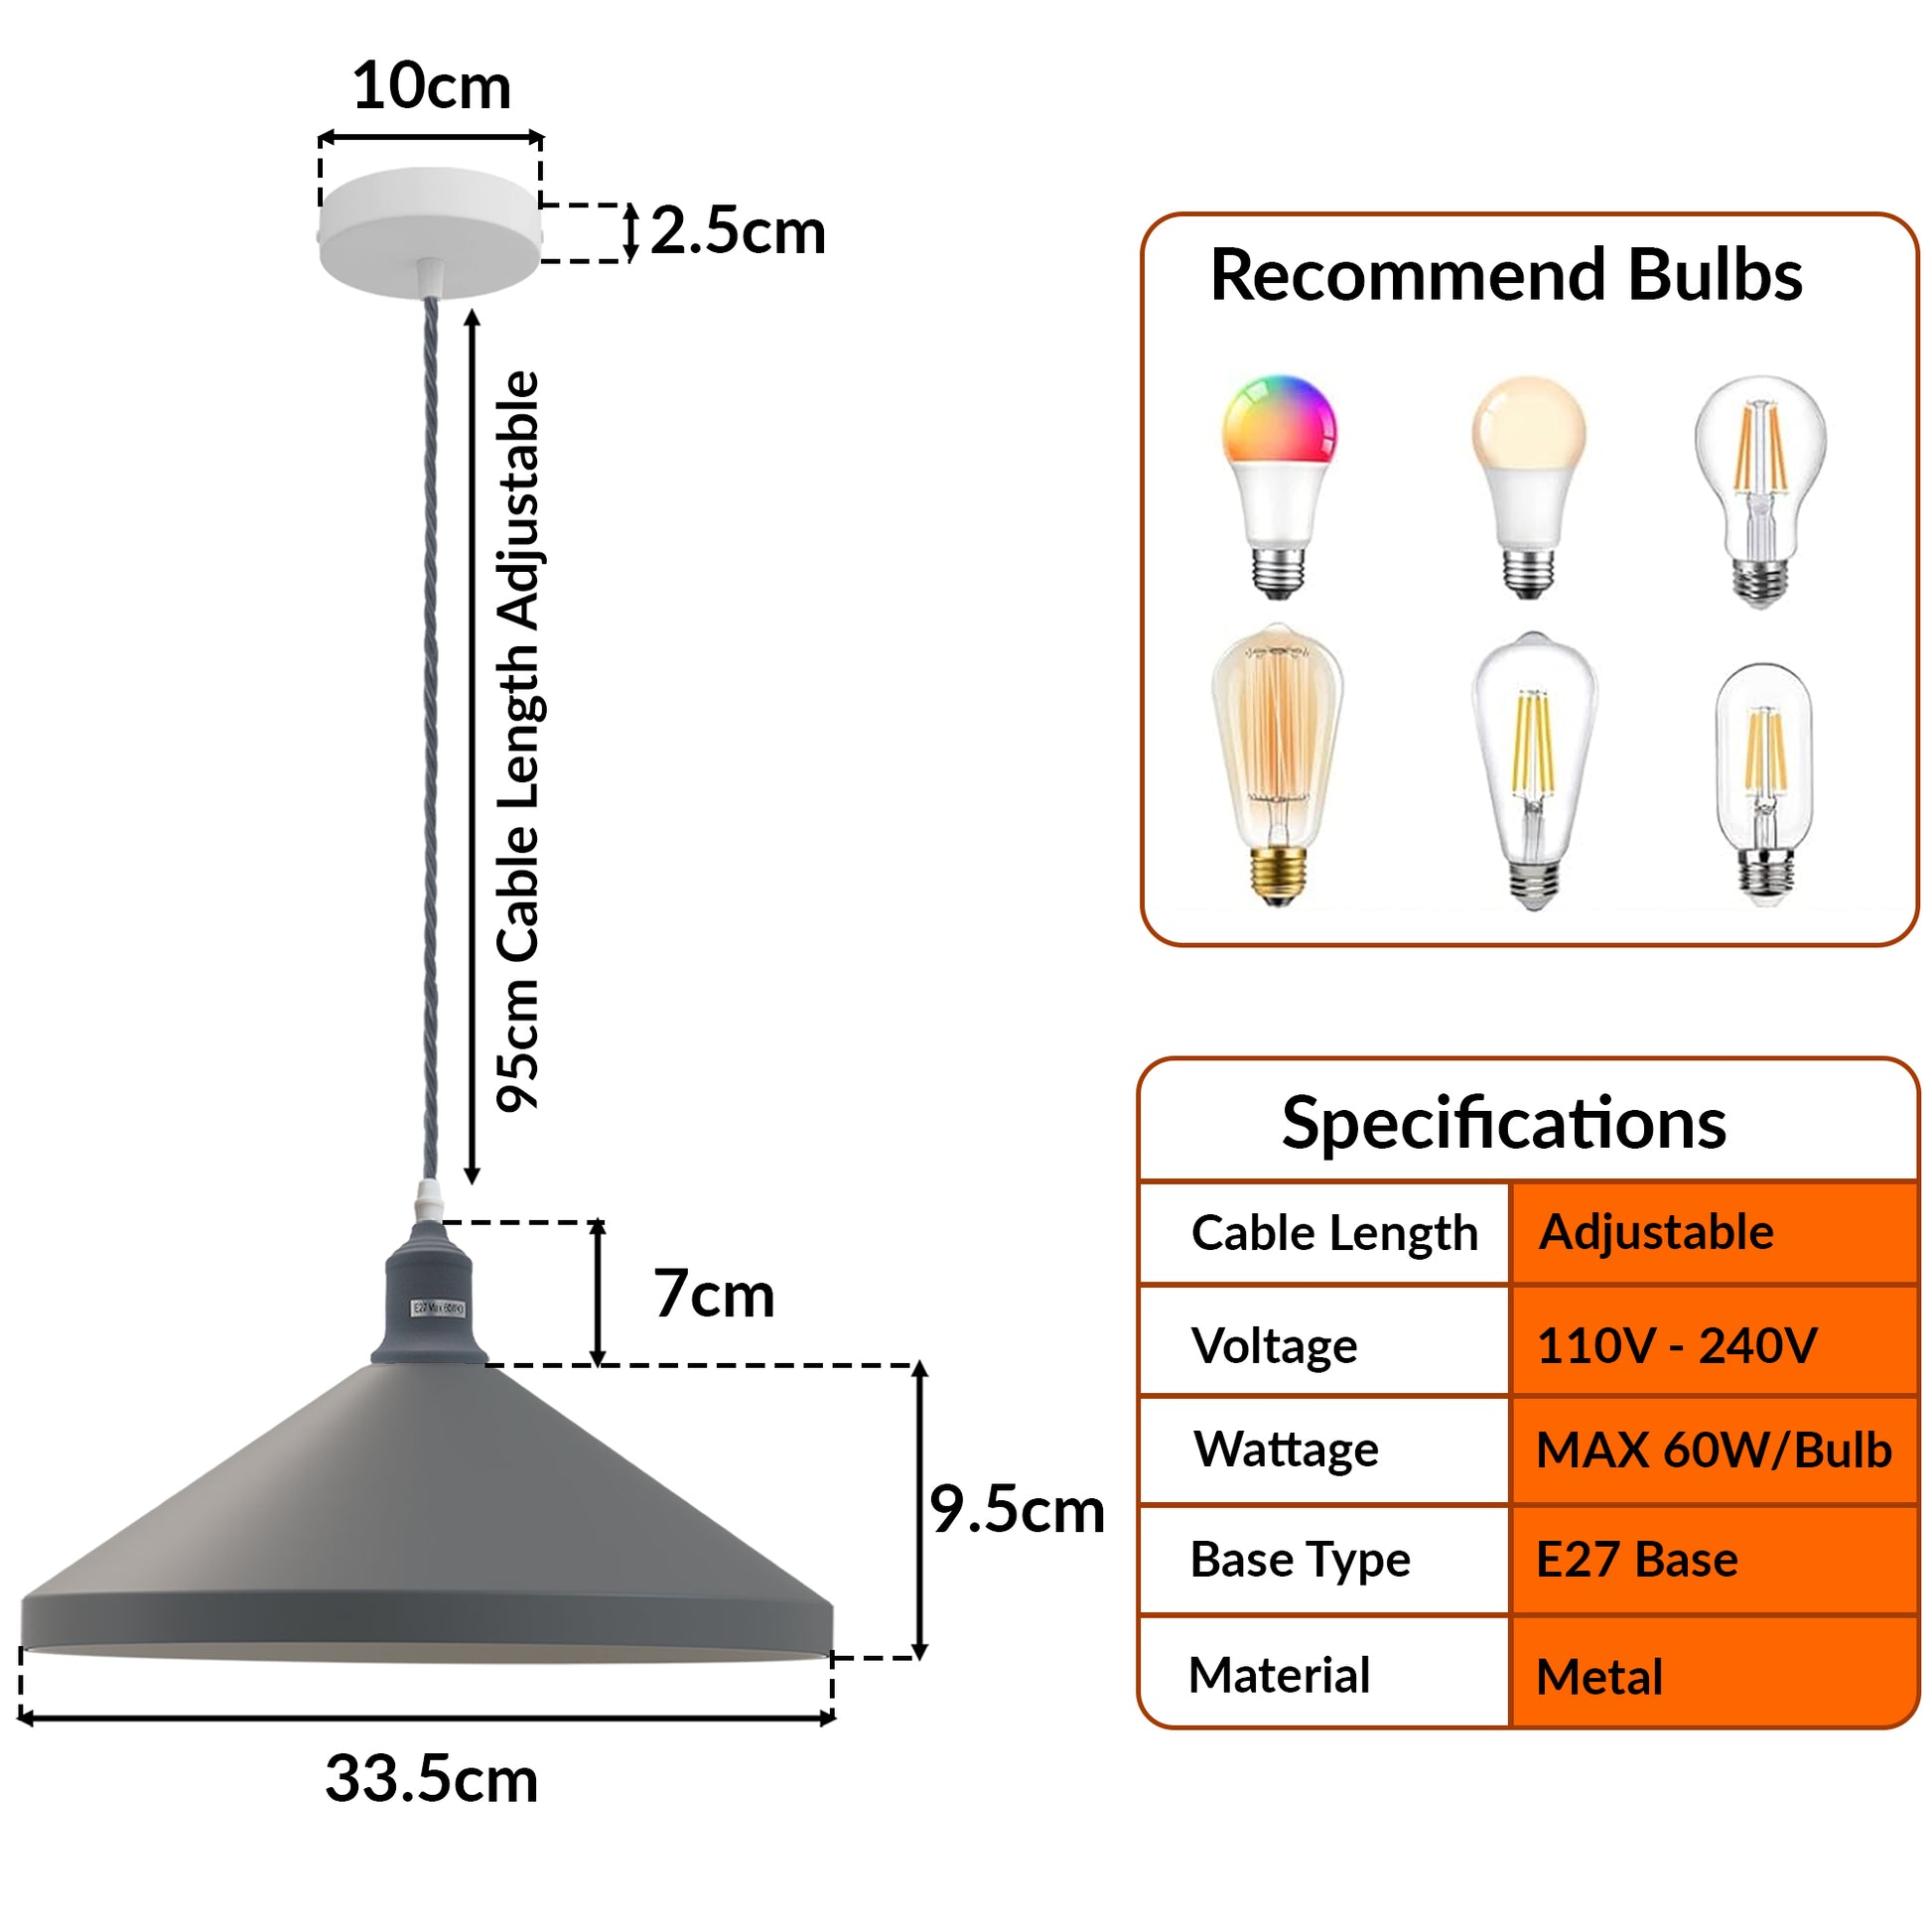 Single pendant Light with Recommended Bulb Bases 